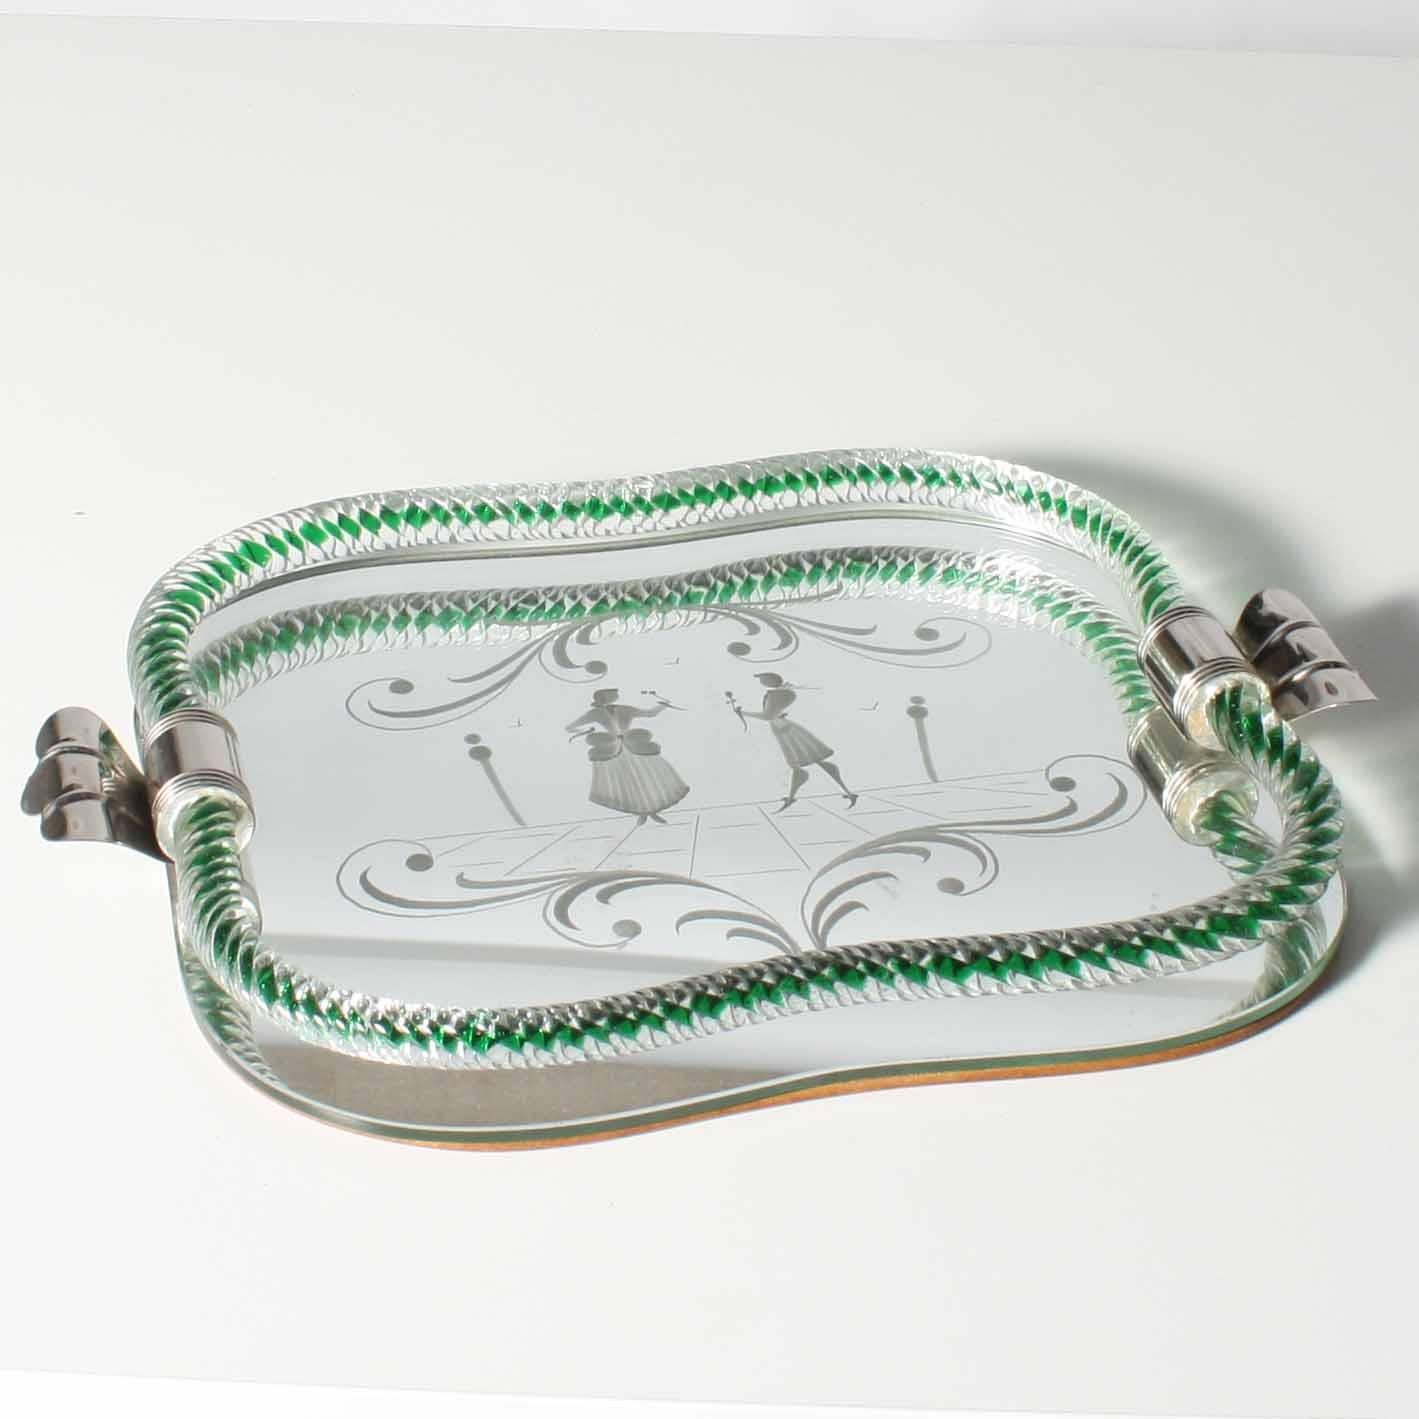 Murano mirrored tray with green blown Murano glass edging and sterling silver handles. Etched dancing scene in clear mirror.